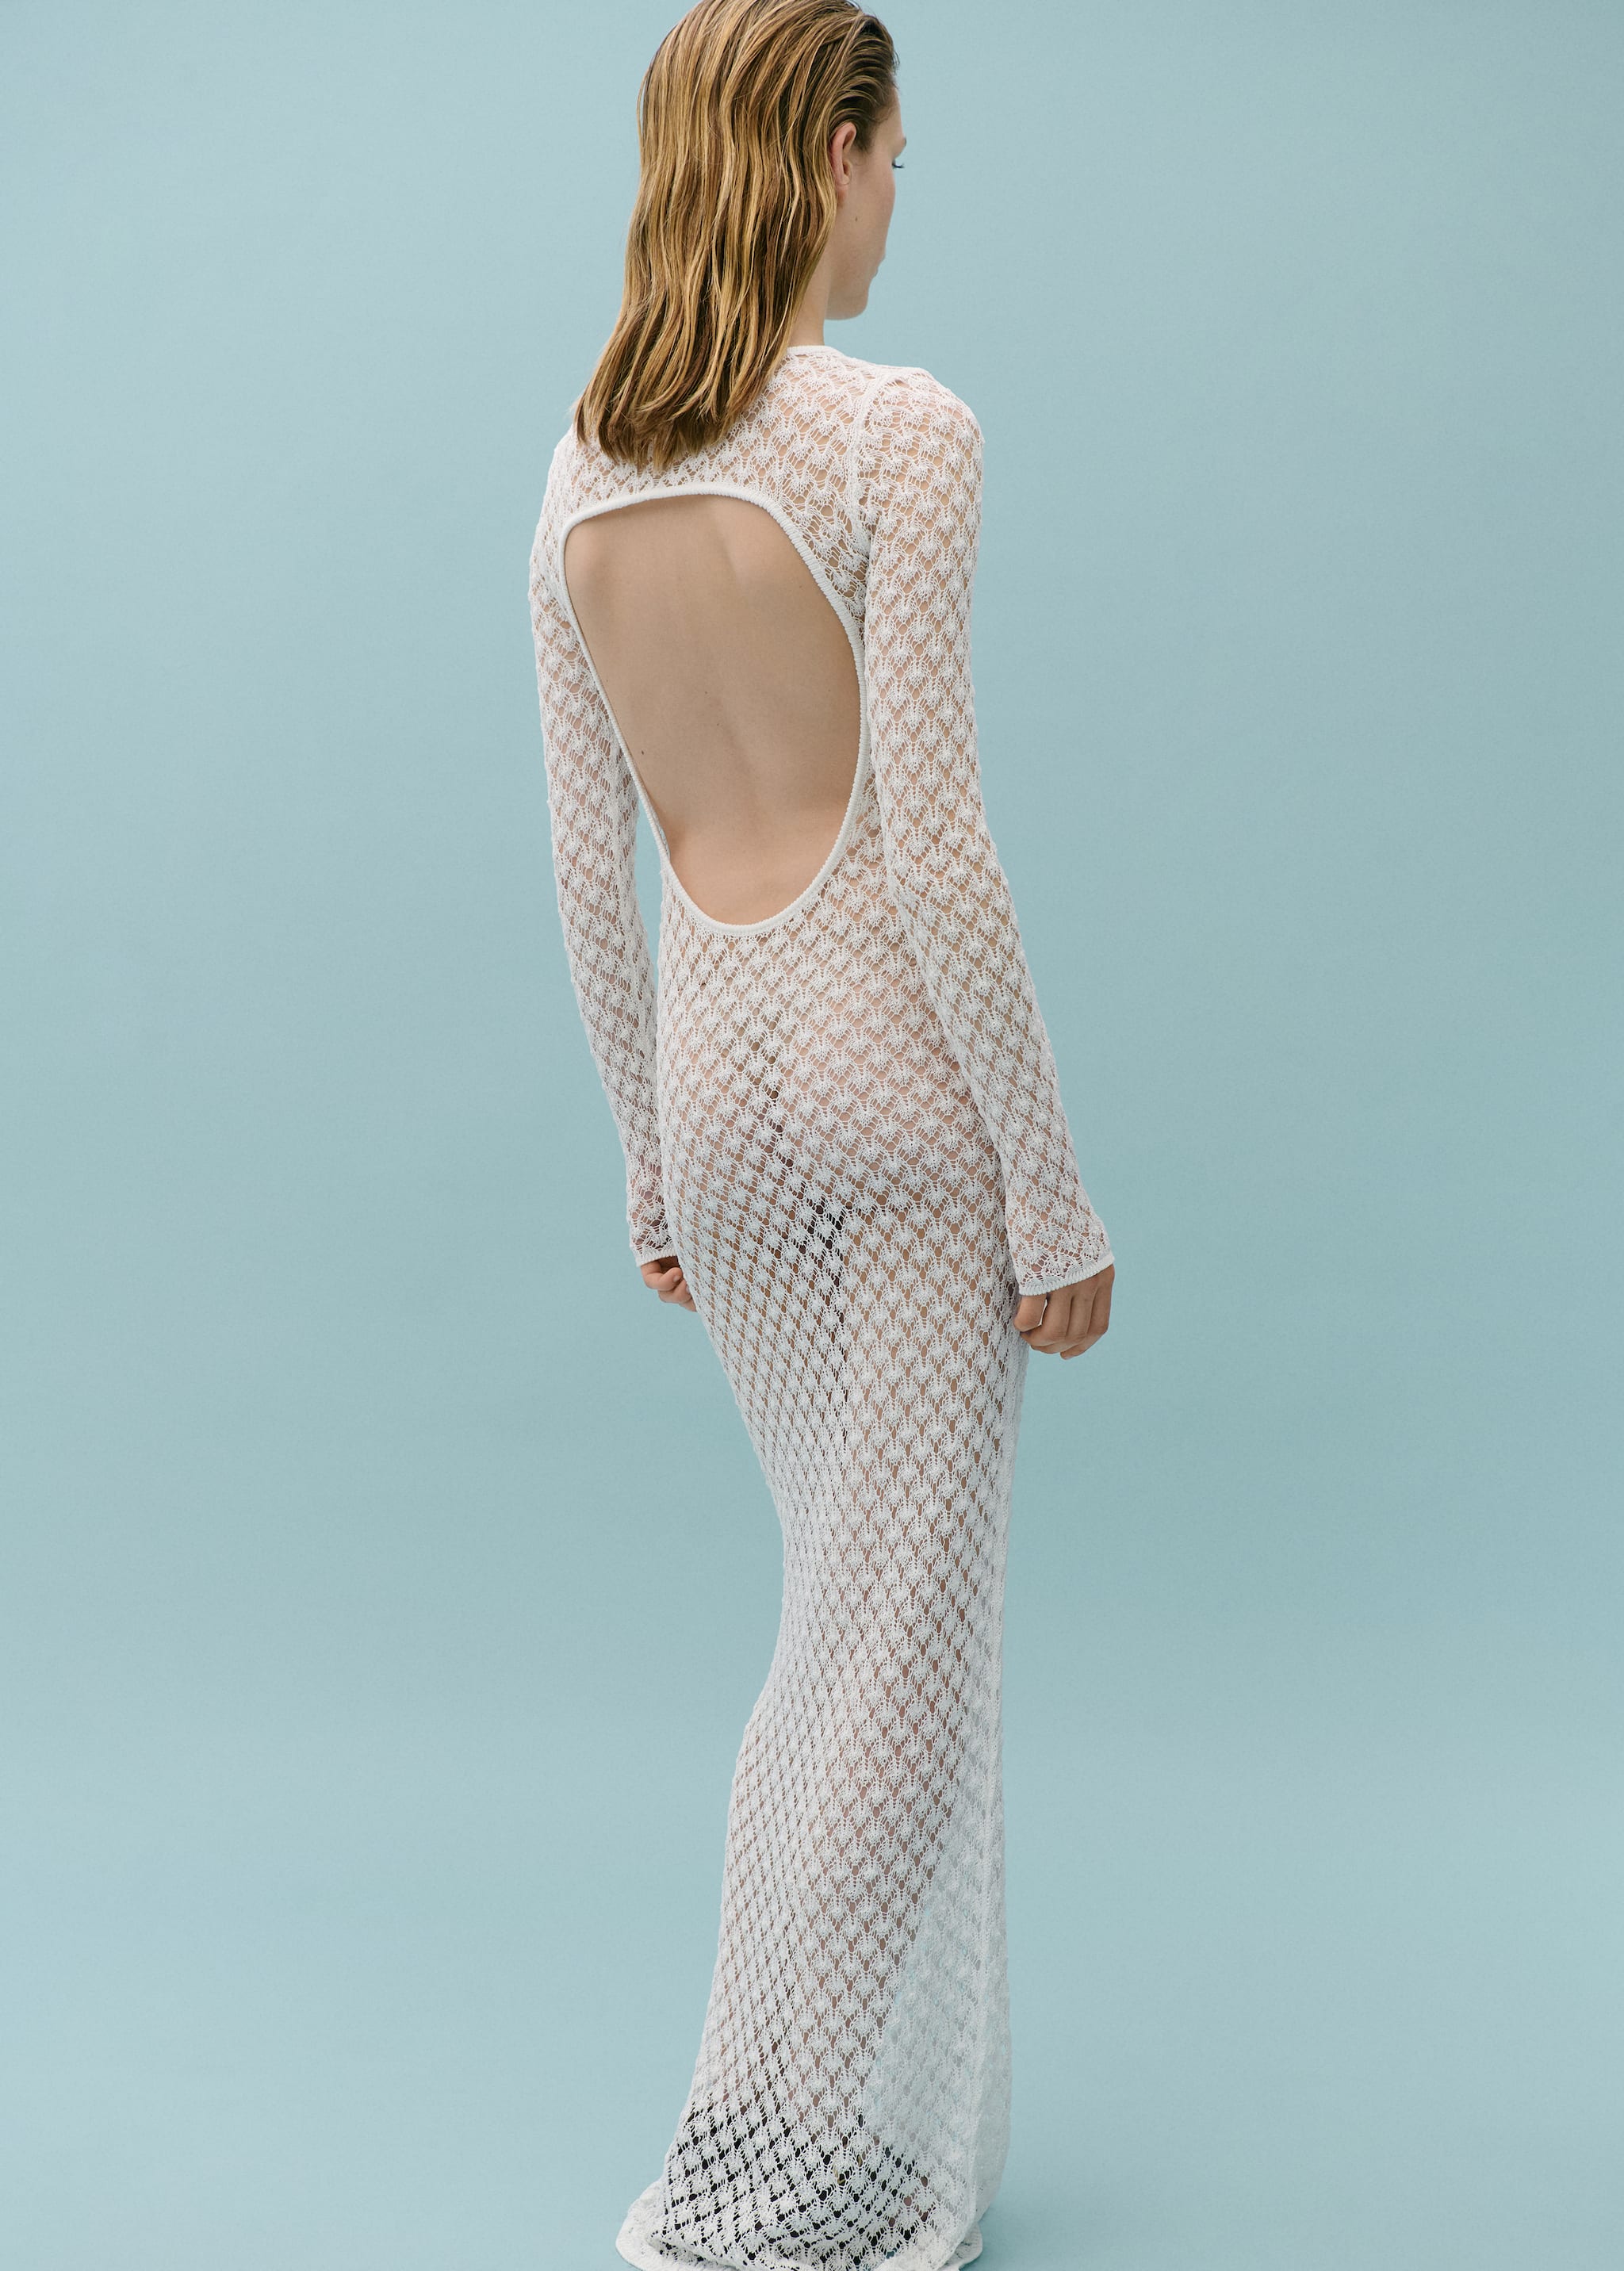 Crochet dress with open back - Reverse of the article